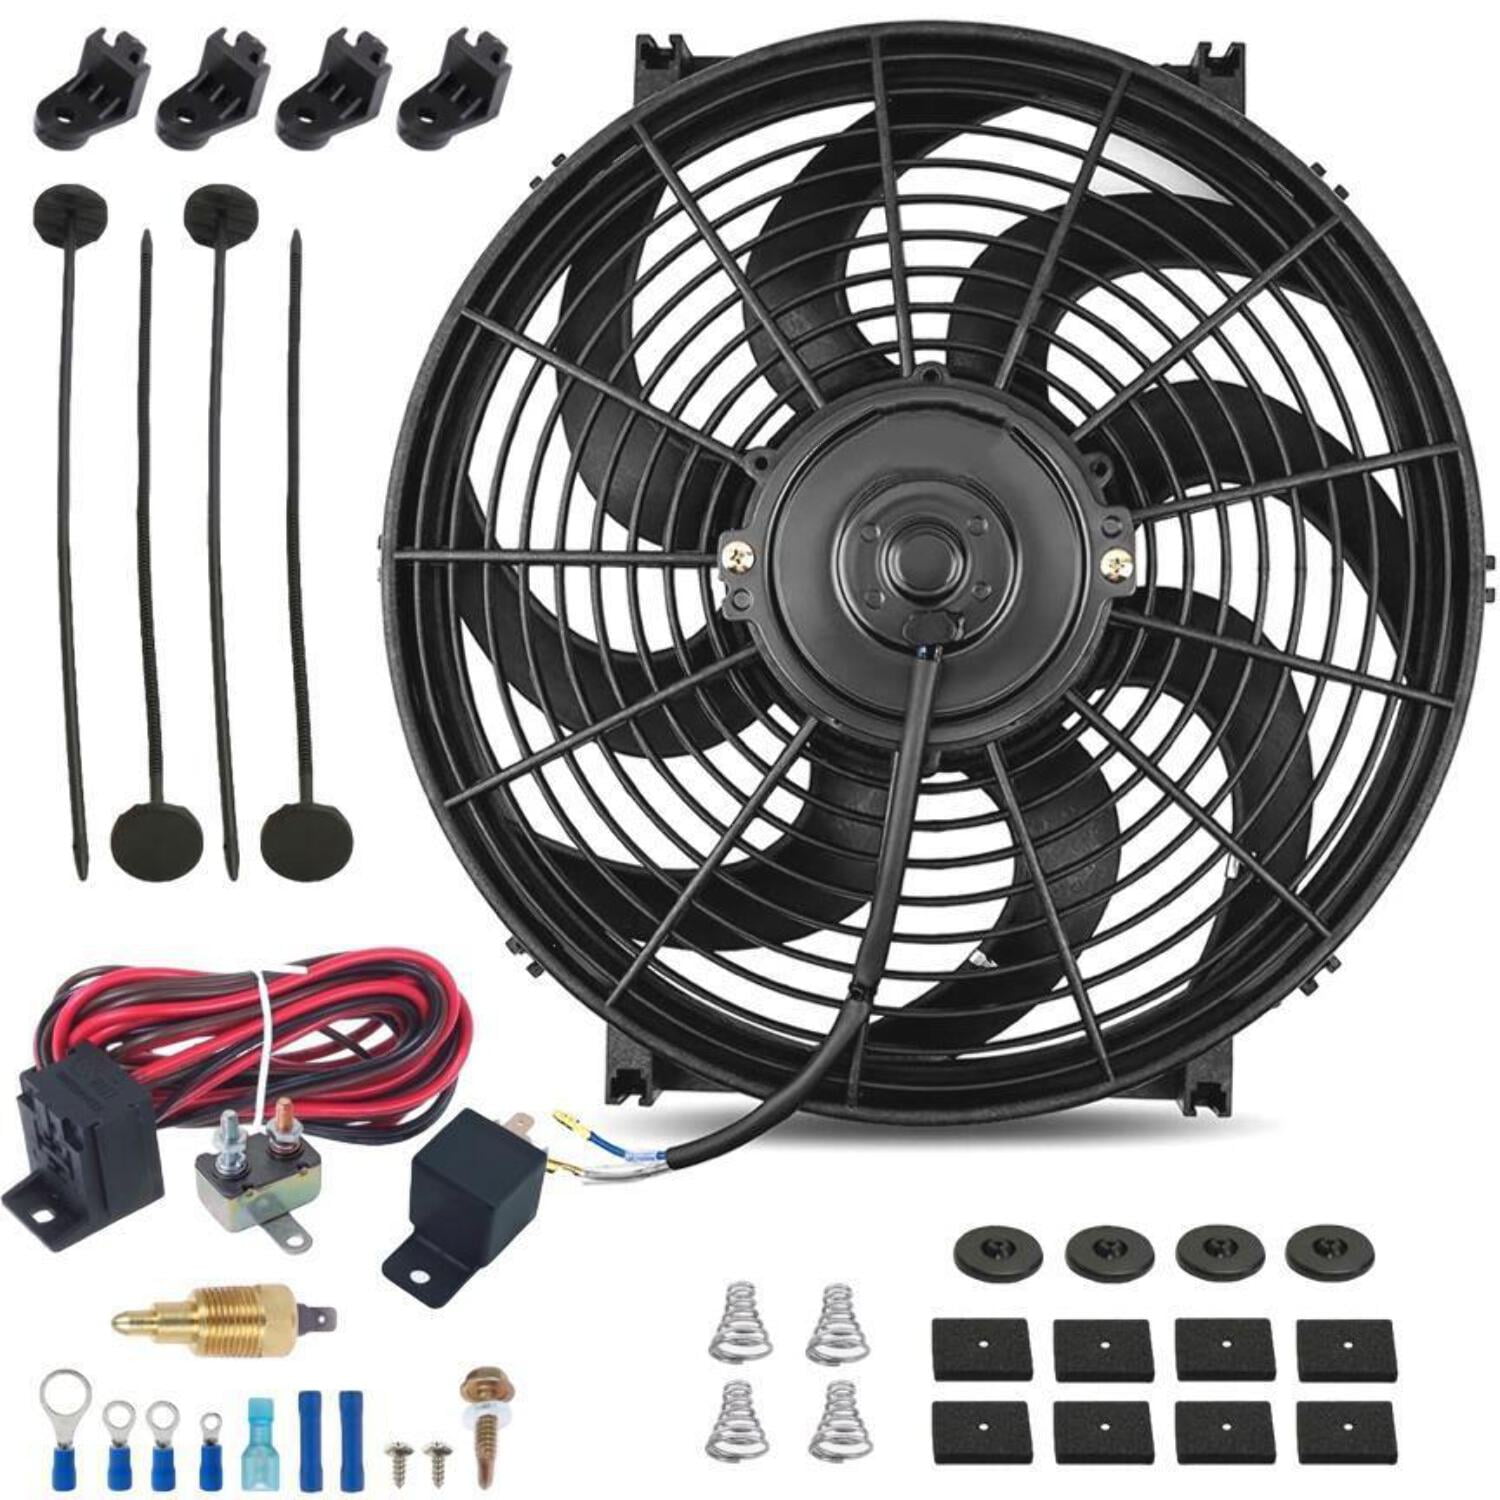 14-15 Inch 130w Electric Cooling Fan Grounding Thermostat Switch Kit 